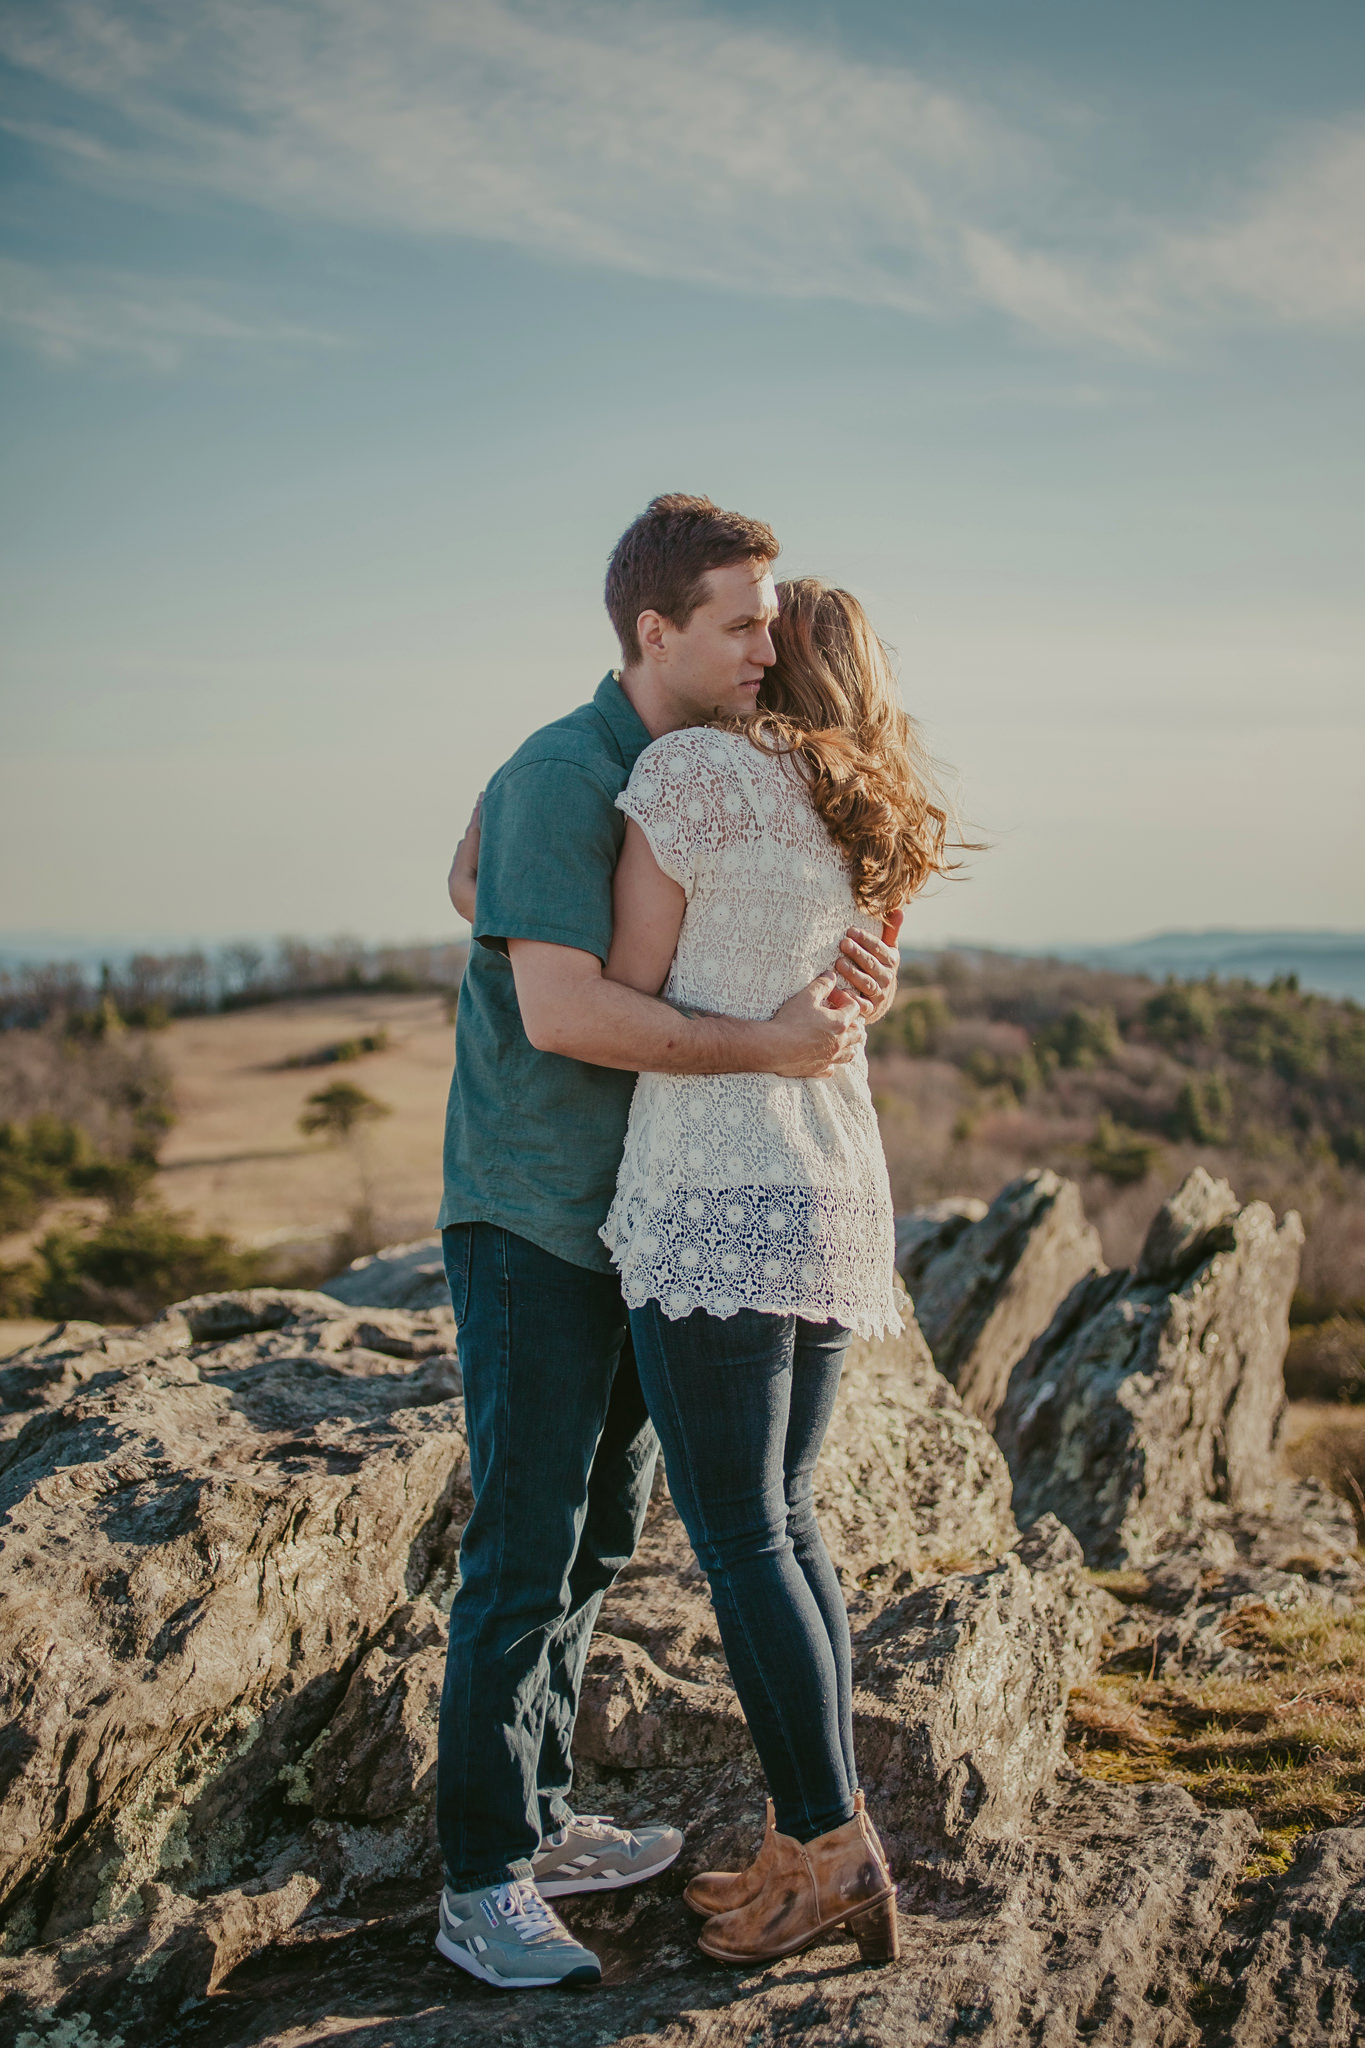 A couple hugs a top Doughton Park overlooking the Blue Ridge Parkway in NC. Mabyn Ludke Photography.